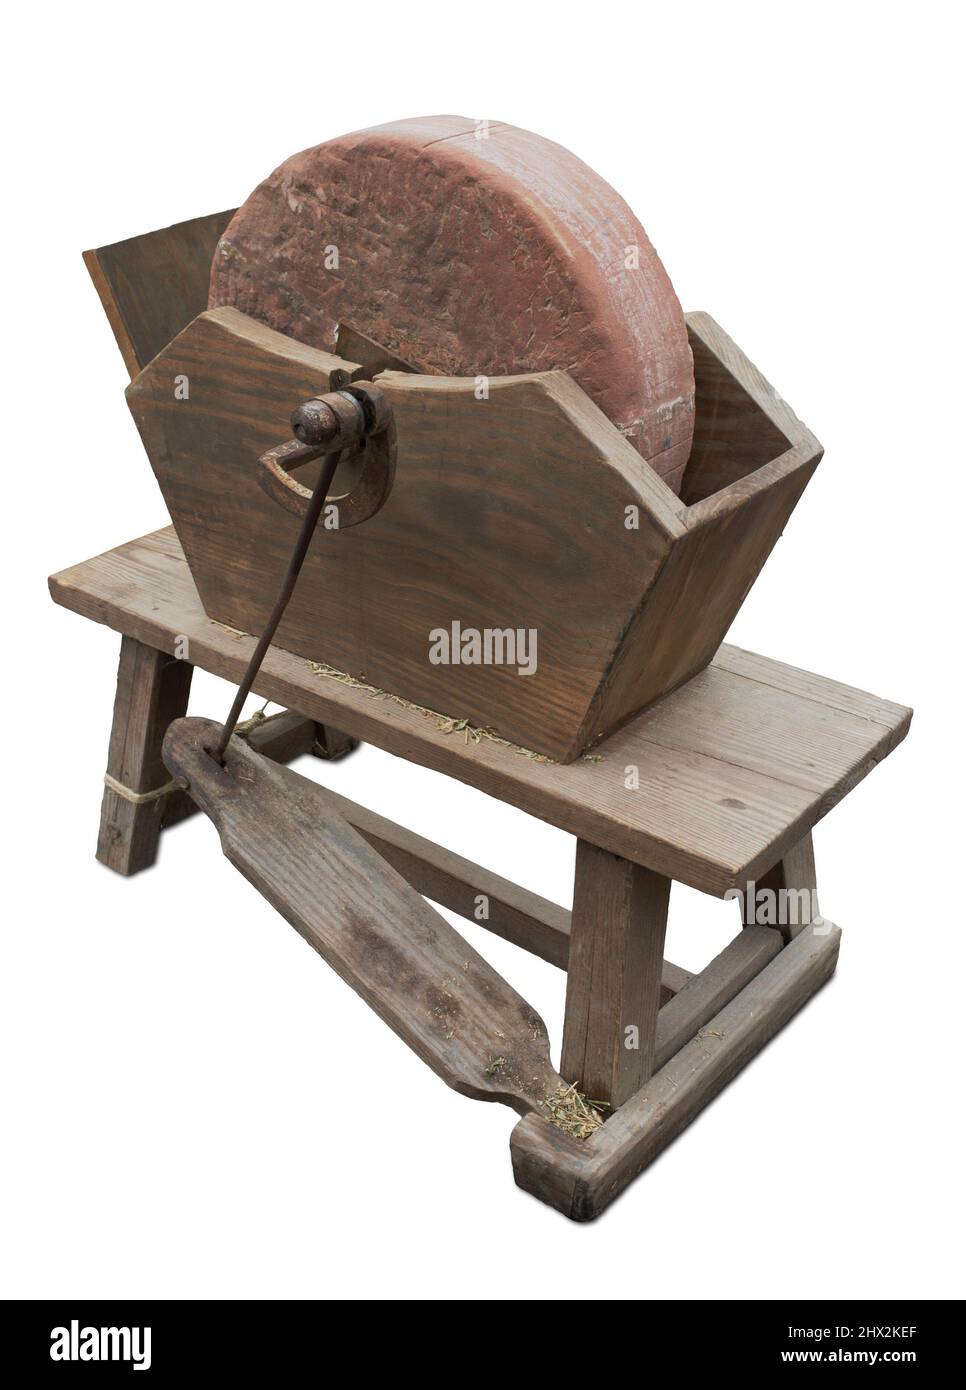 Antique pedal-powered sharpening machine. Isolated over white background. Stock Photo